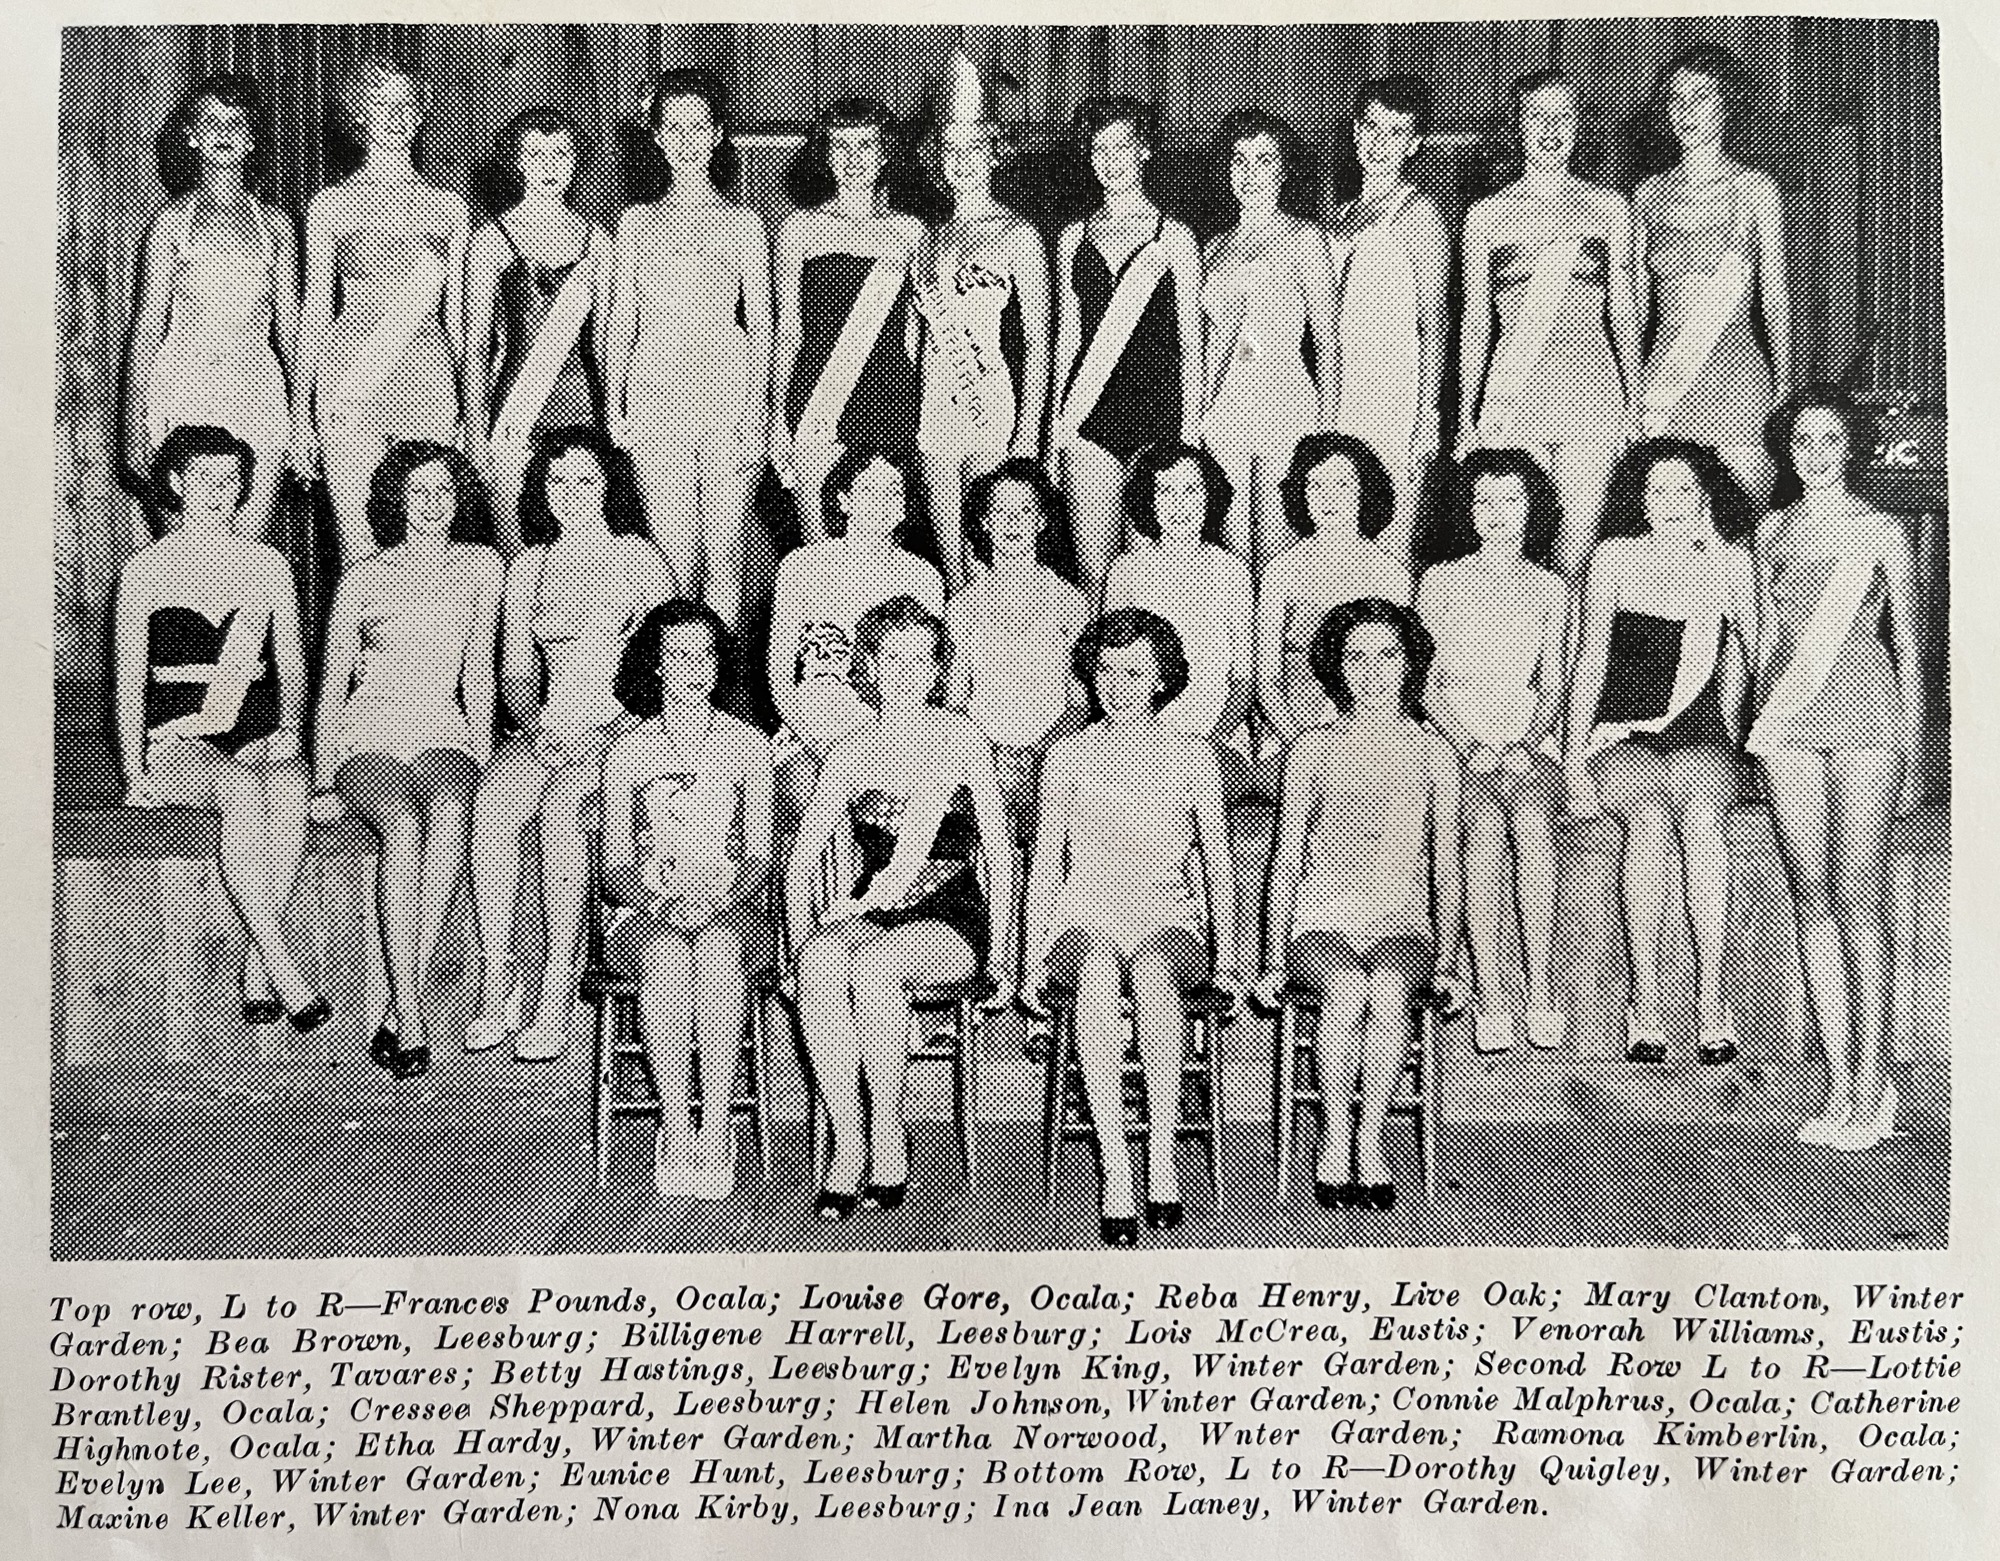 Beauty pageants were a regular occurrence at Florida Telephone, and women from all of the exchanges participated.